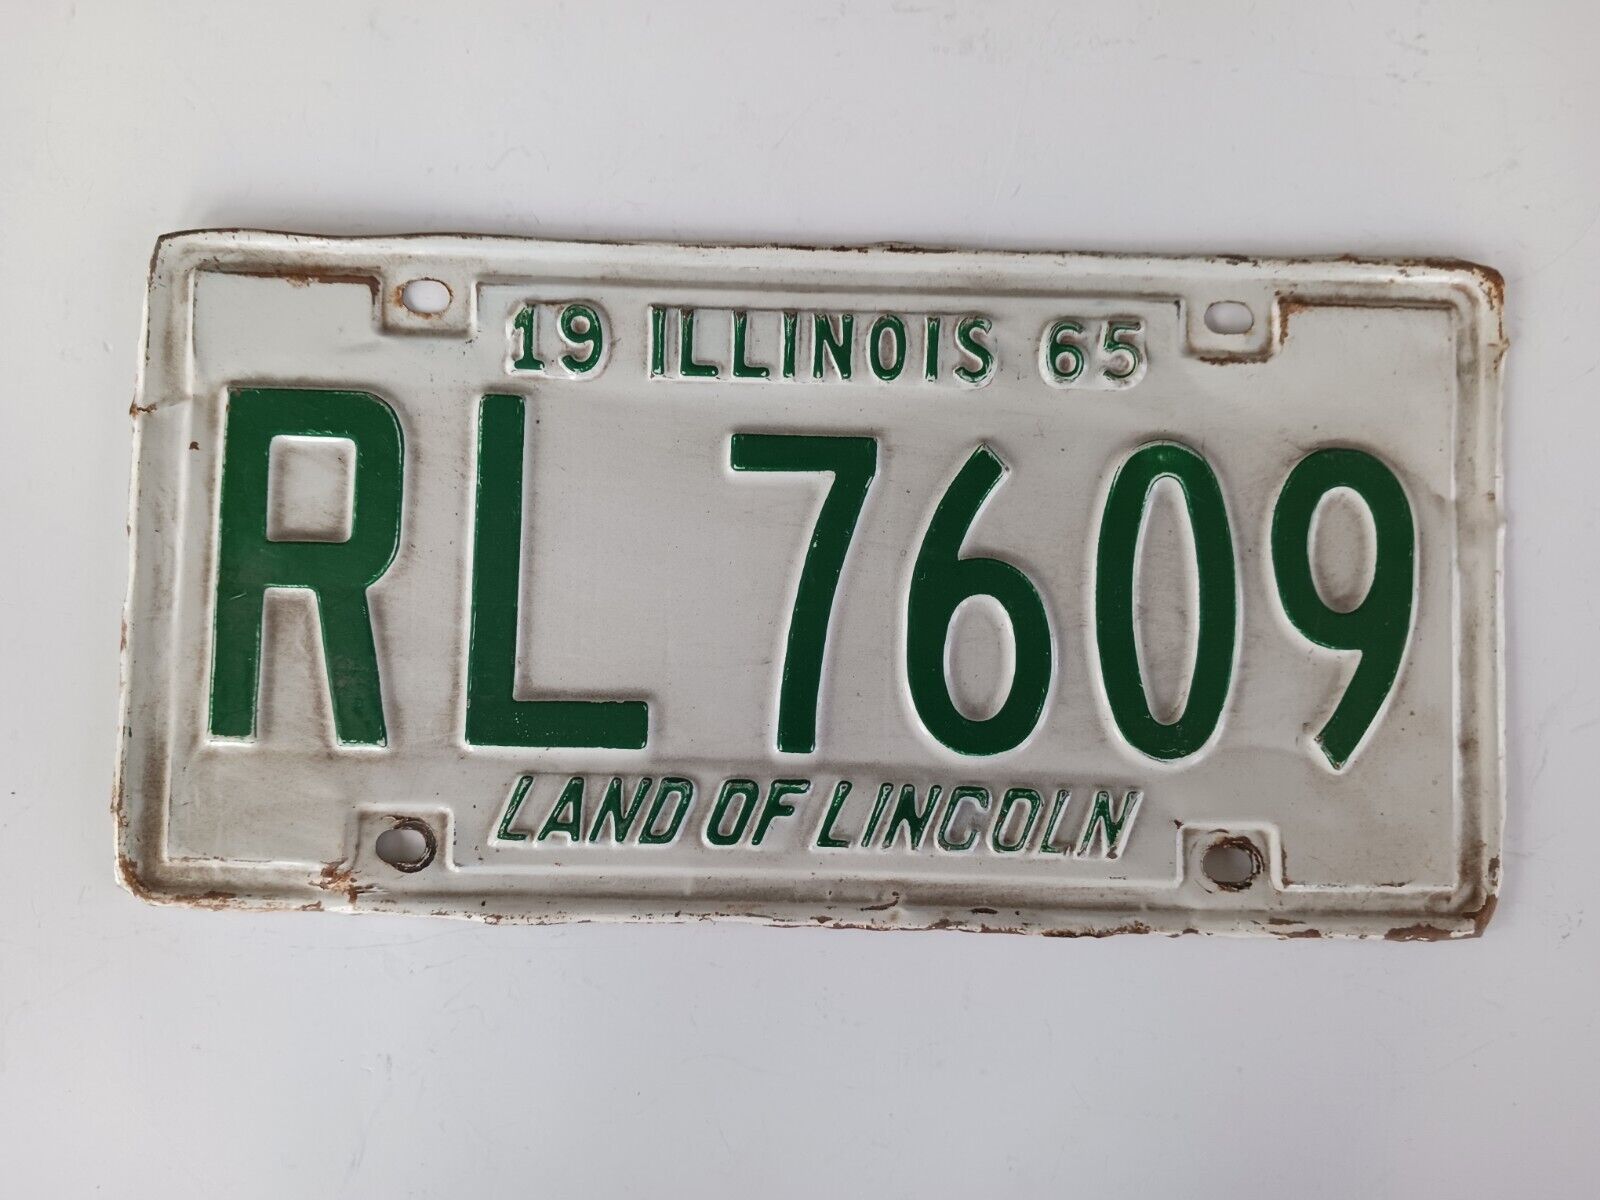 1965 Illinois IL License Plate RL 7609 Land of Lincoln